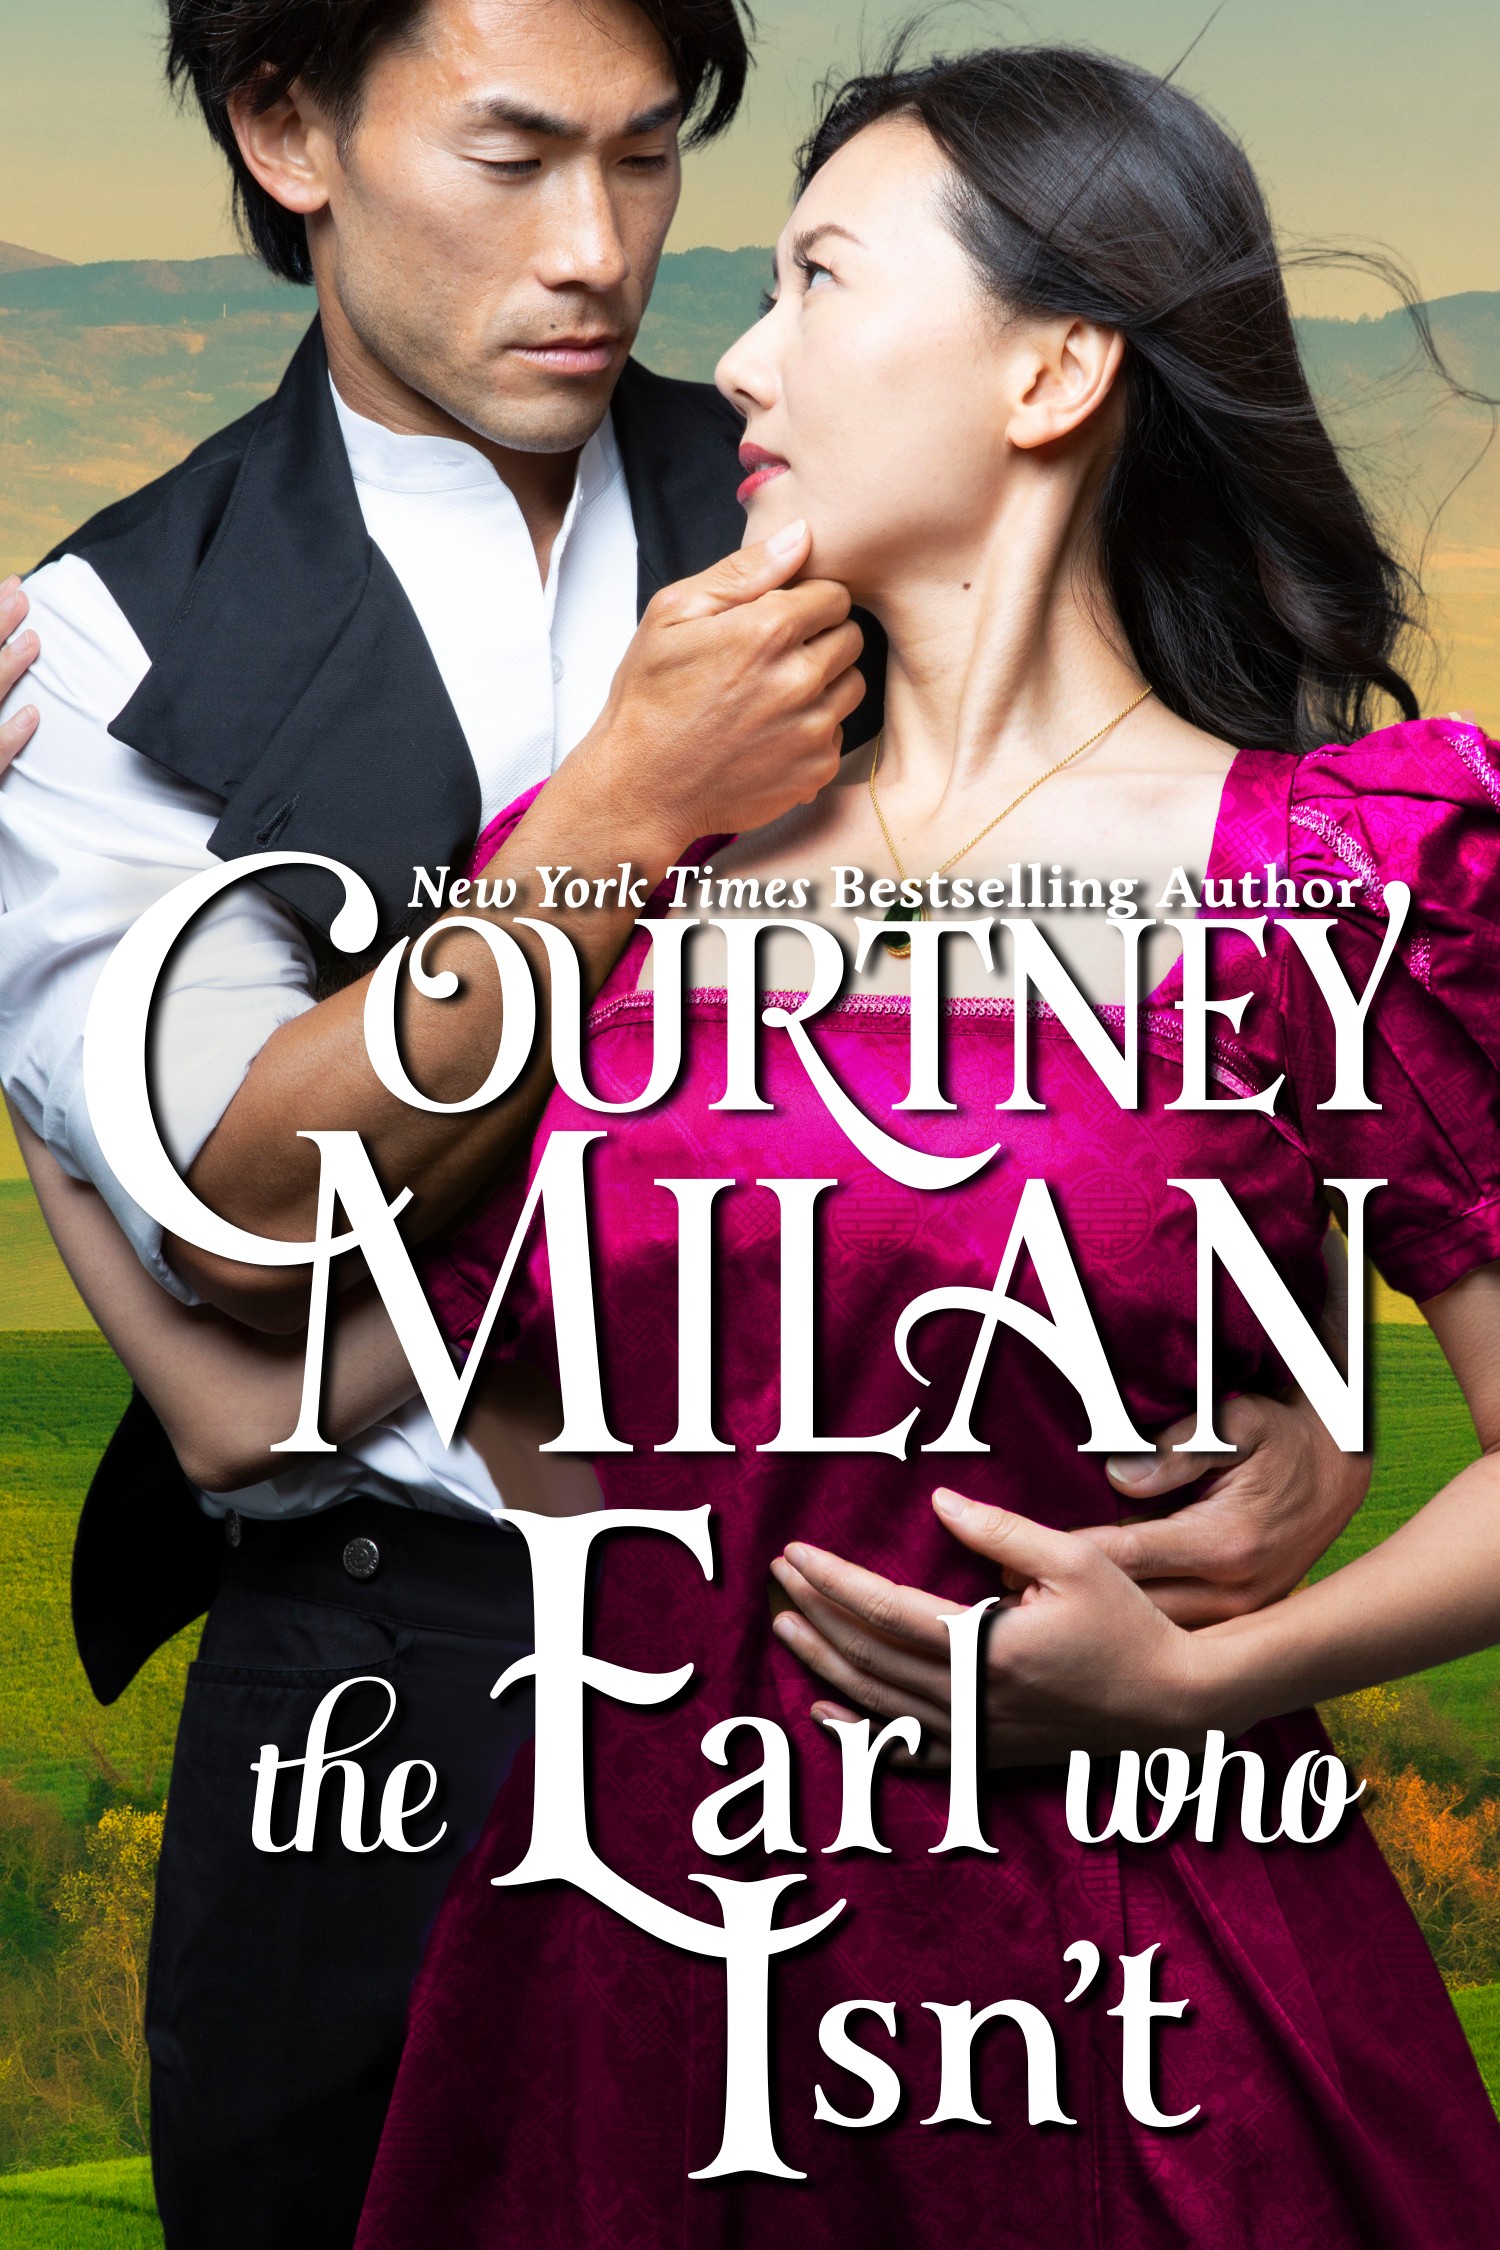 The Earl who Isn't by Courtney Milan: an Asian man embraces an Asian woman in a bright pink gown. His finger is on her chin and he's looking into her eyes.